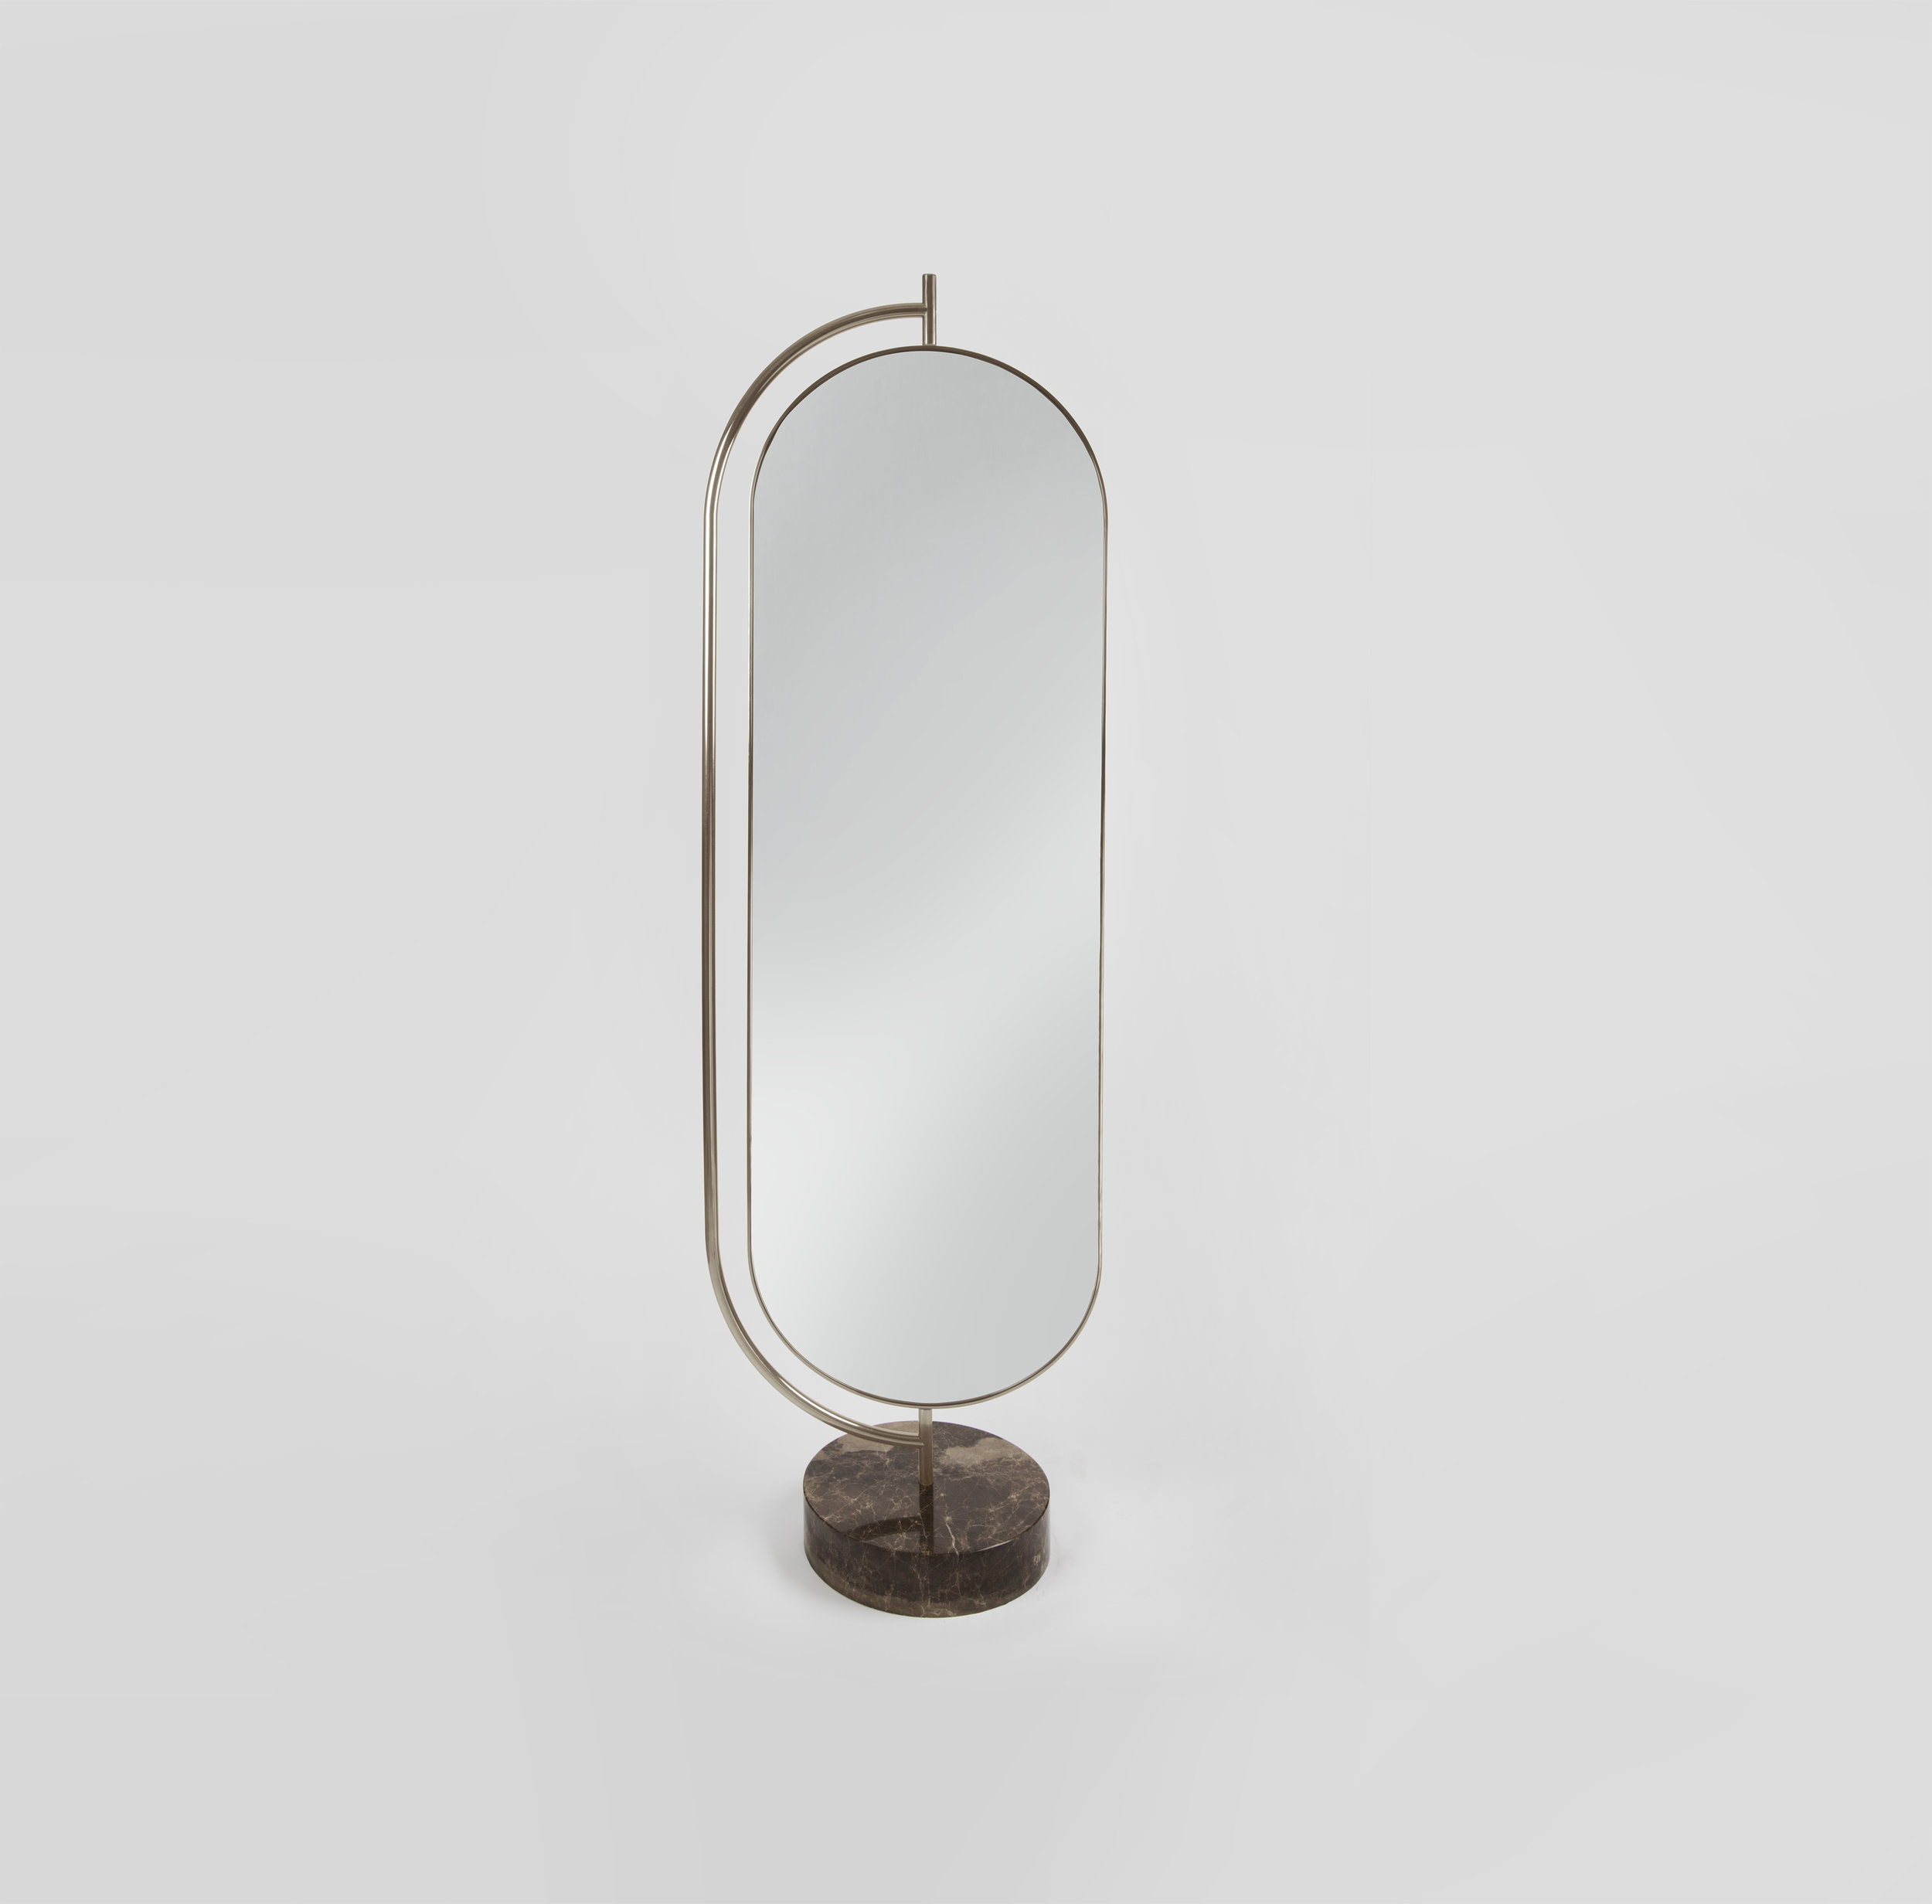 Object mirror. Зеркало pleasure. Зеркало бай. Осколки зеркала. Table Horus by secolo Design artefatto.